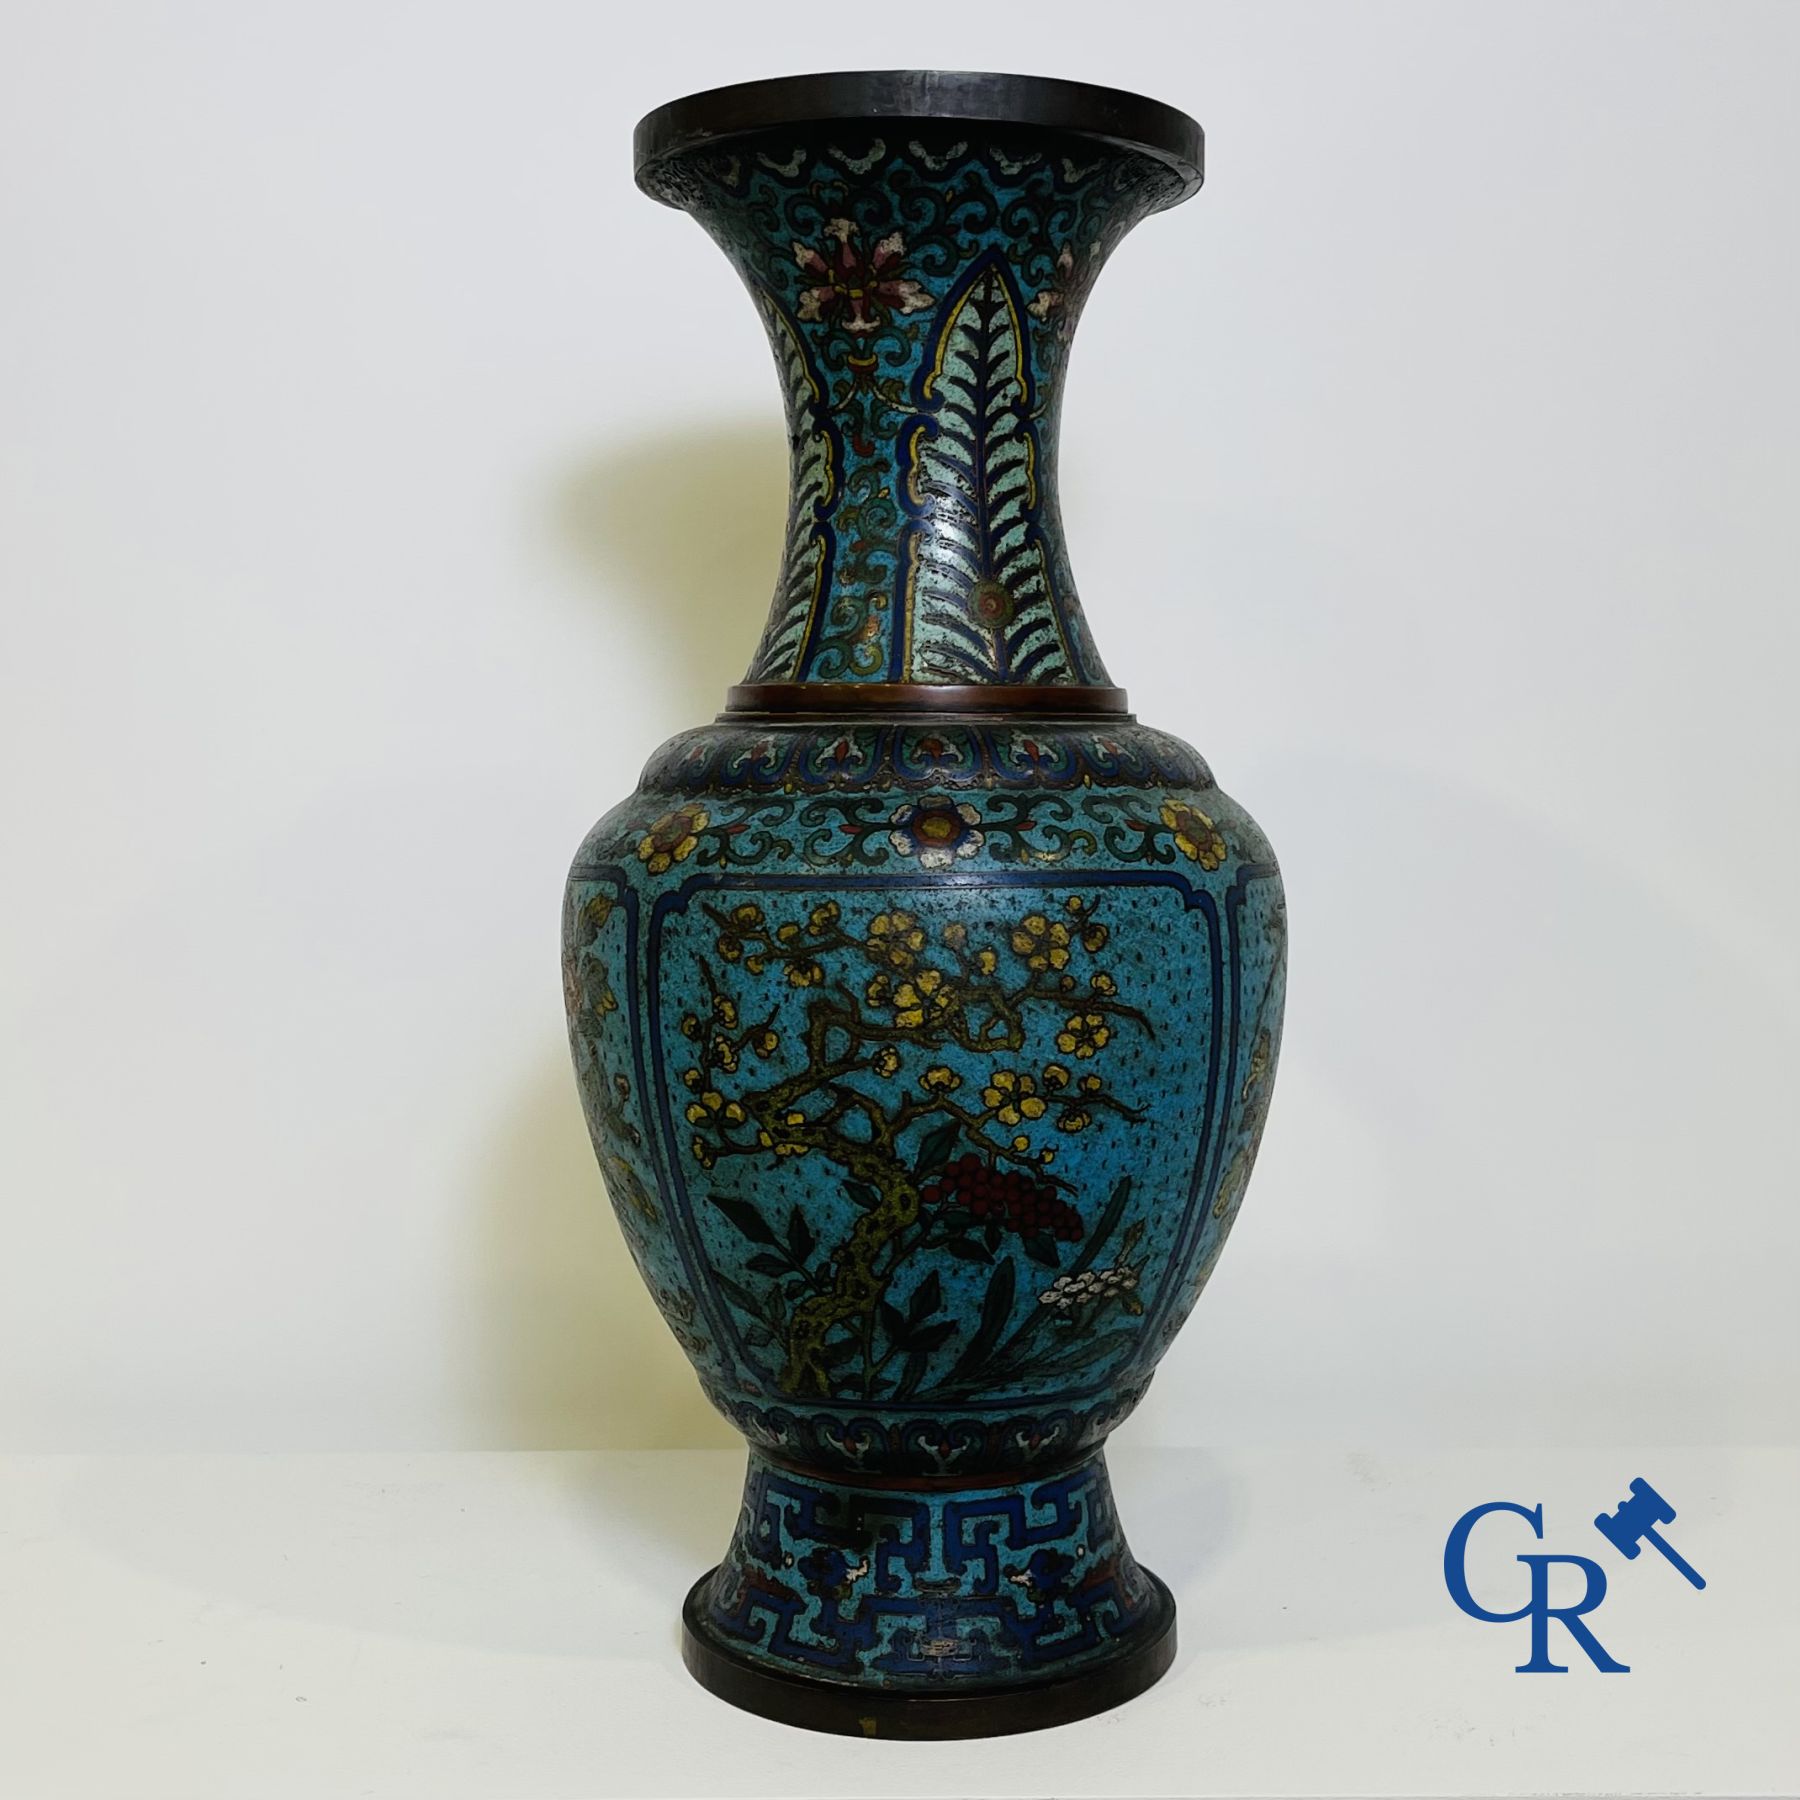 Chinese baluster-shaped vase in bronze and cloisonné. 19th century.